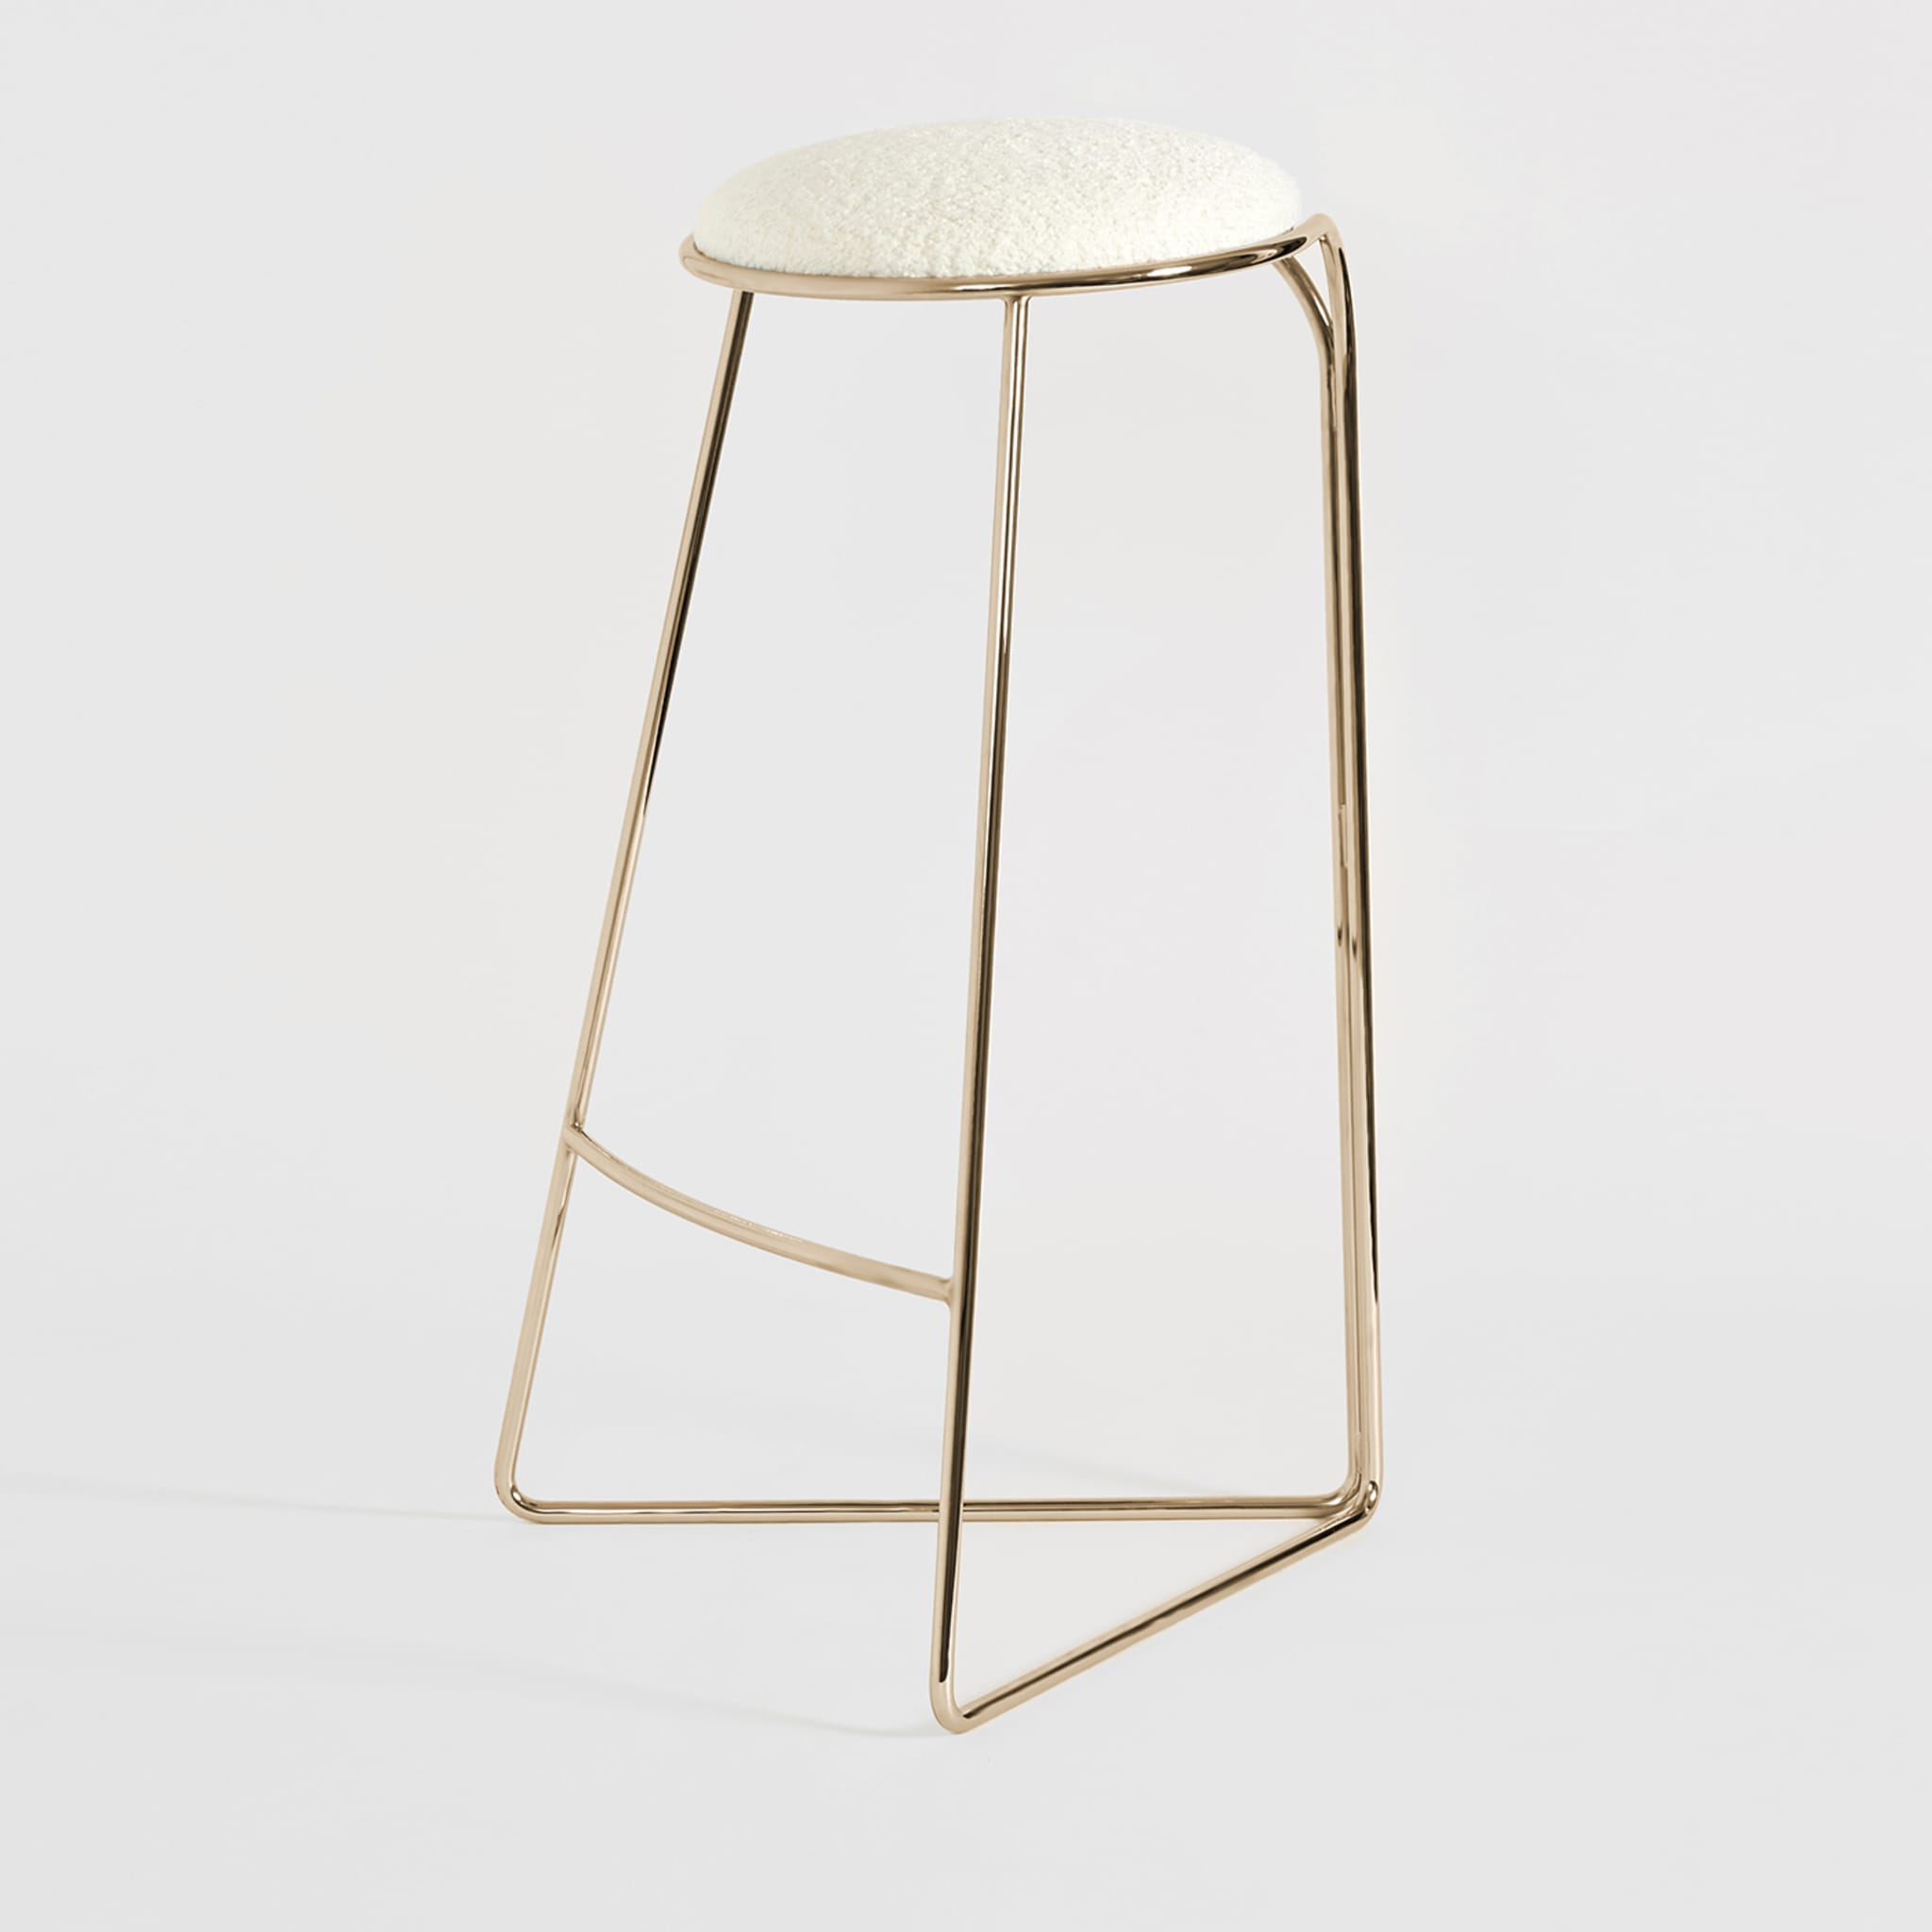 FLOW SCULPTURAL GOLD AND WHITE HI STOOL - Alternative view 1